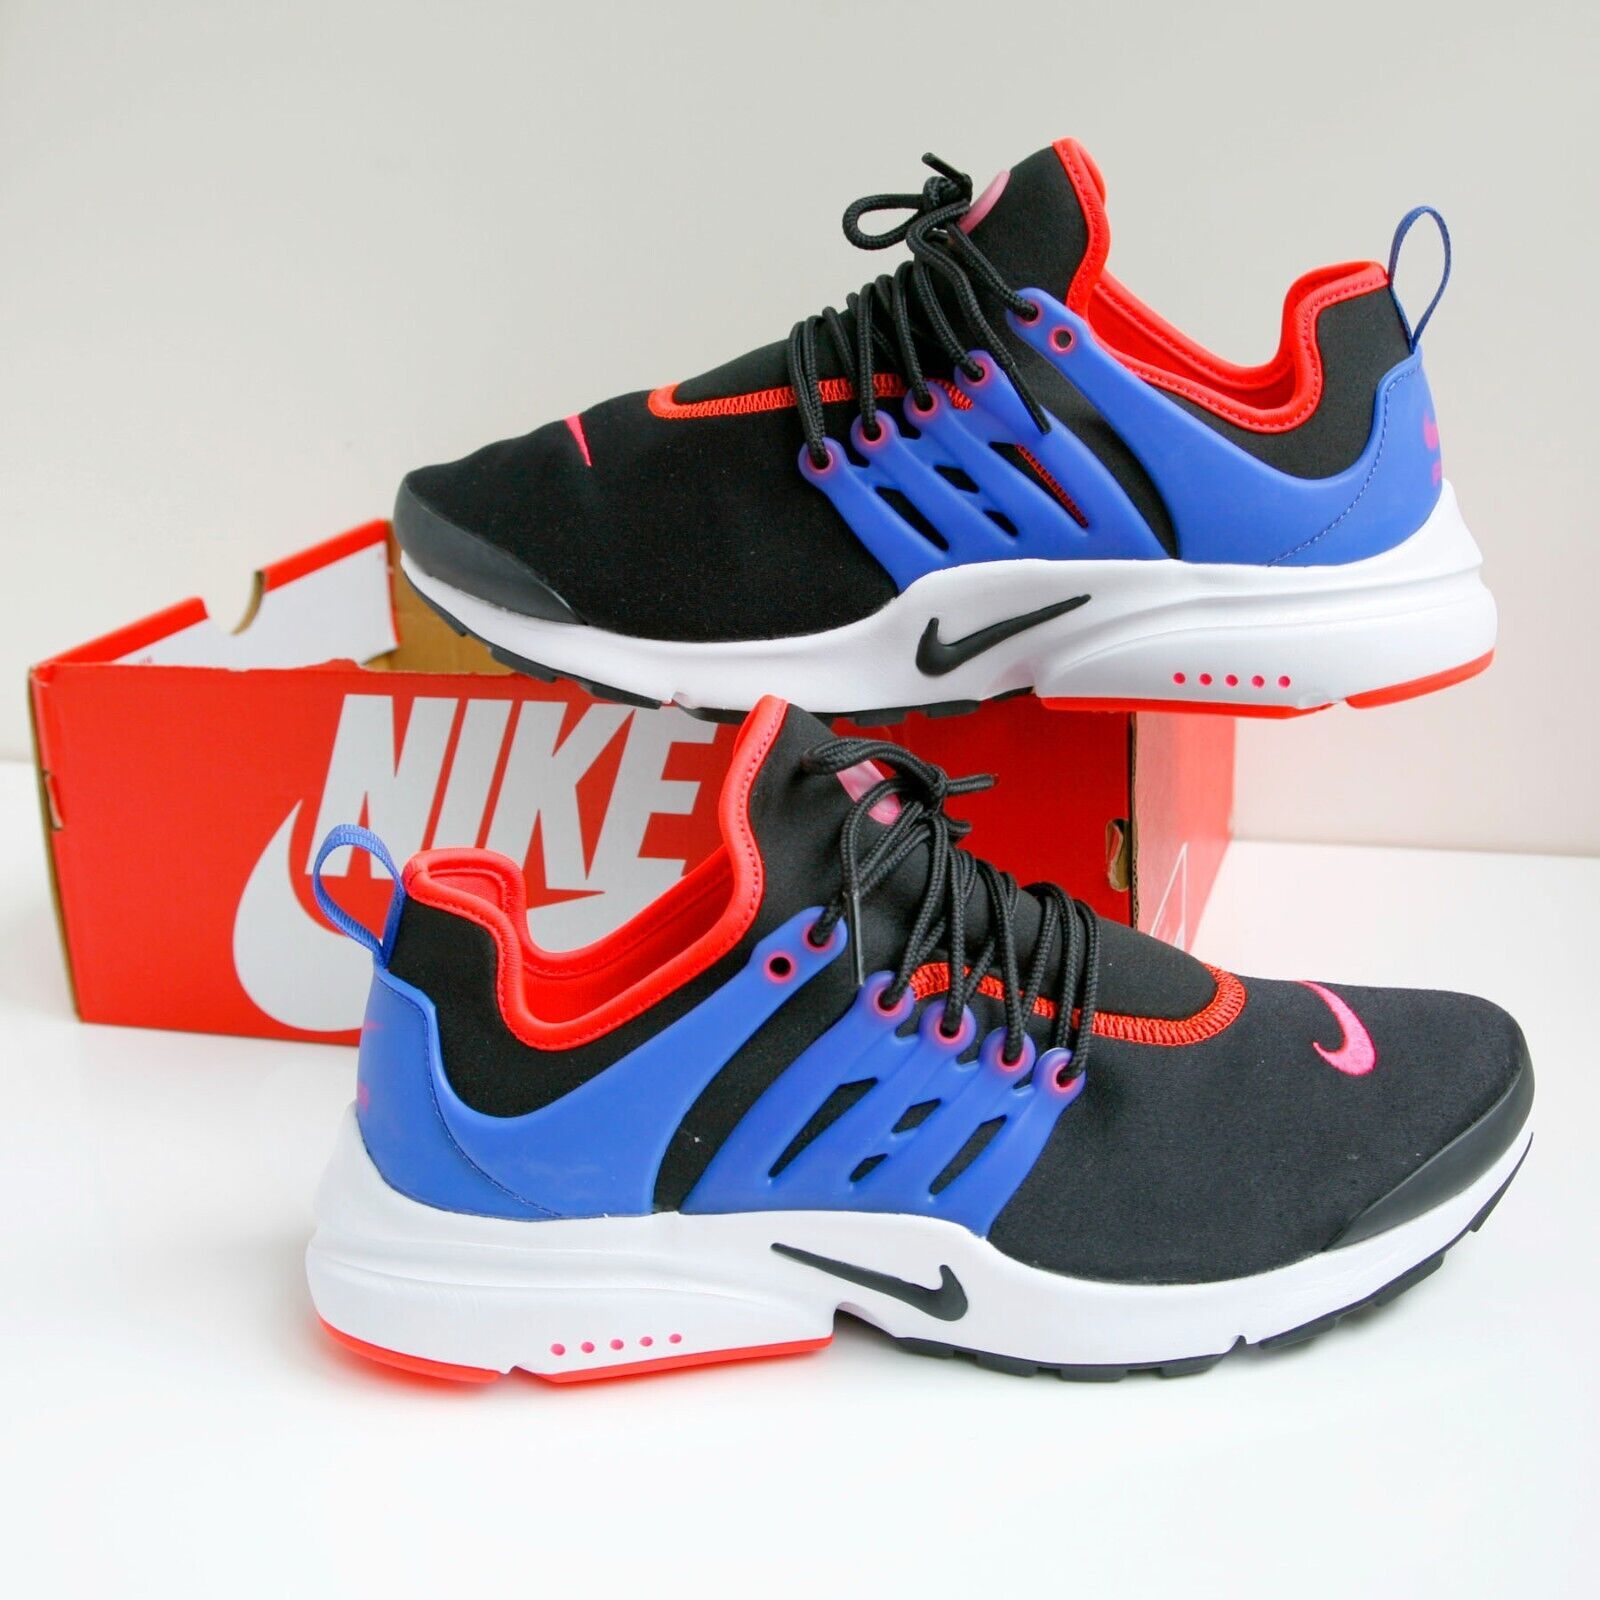 Primary image for Nike Air Presto Women's Running Shoes Black Hyper Pink Blue Size 11 REG: $130